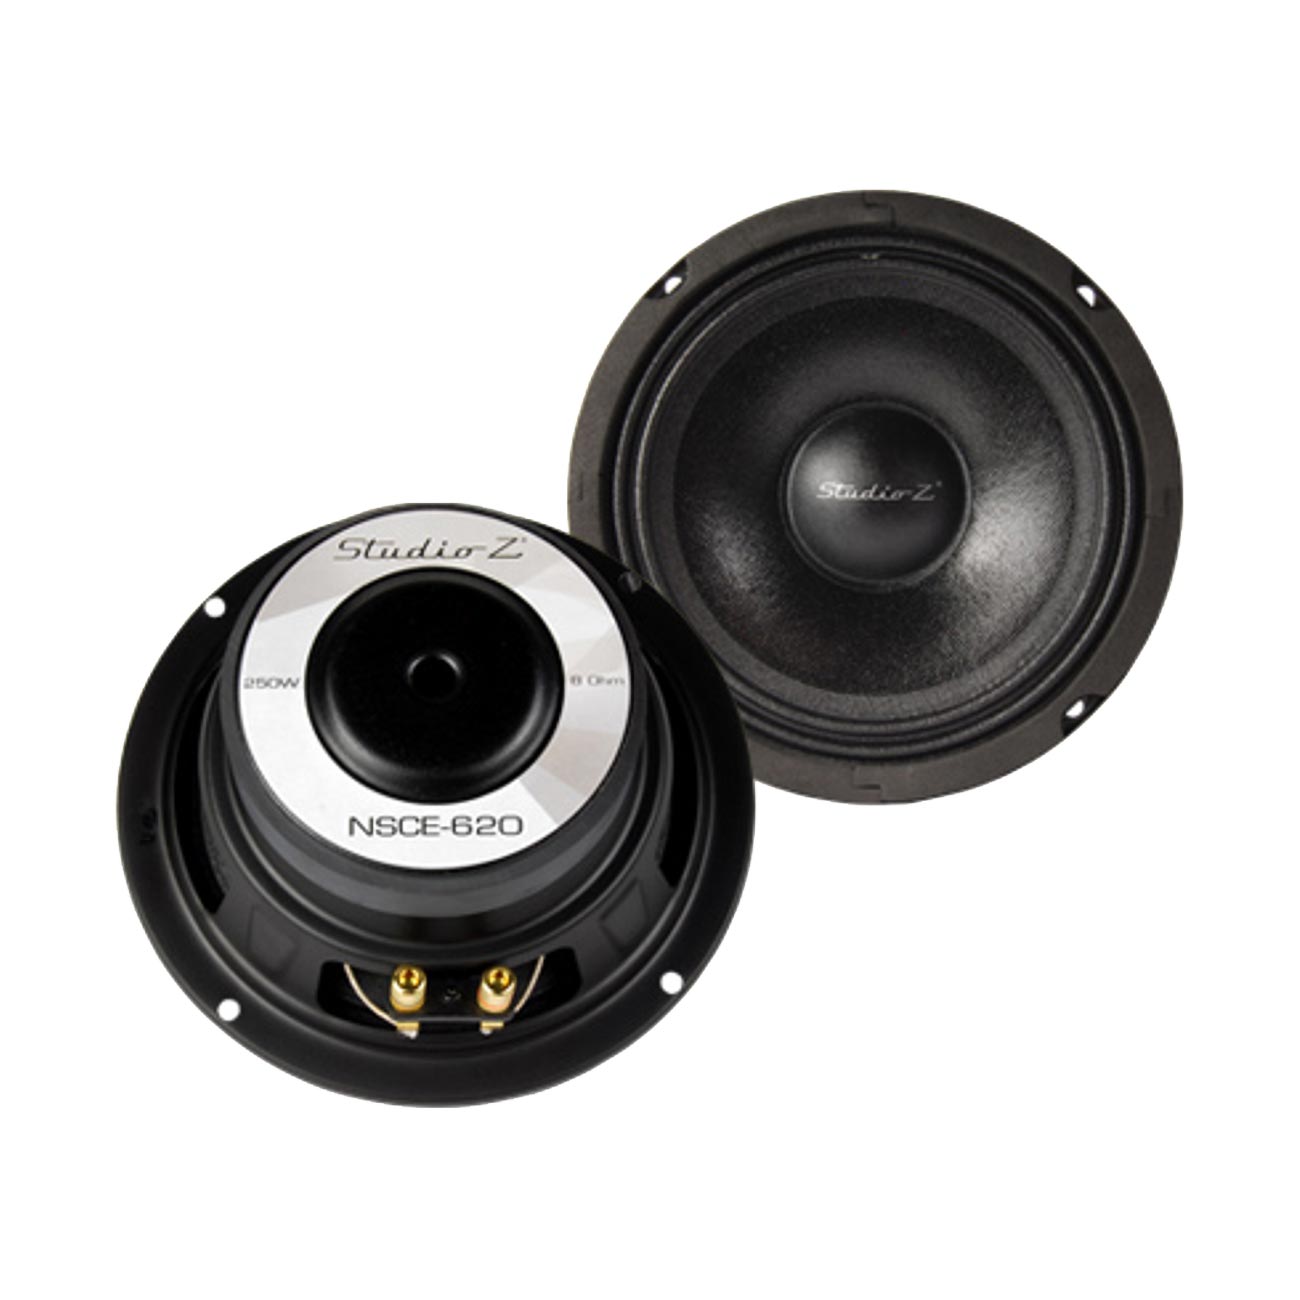 Studio Z 6" Woofer 250 watts Max 8 OHM with 1" Aluminum Voice Coil